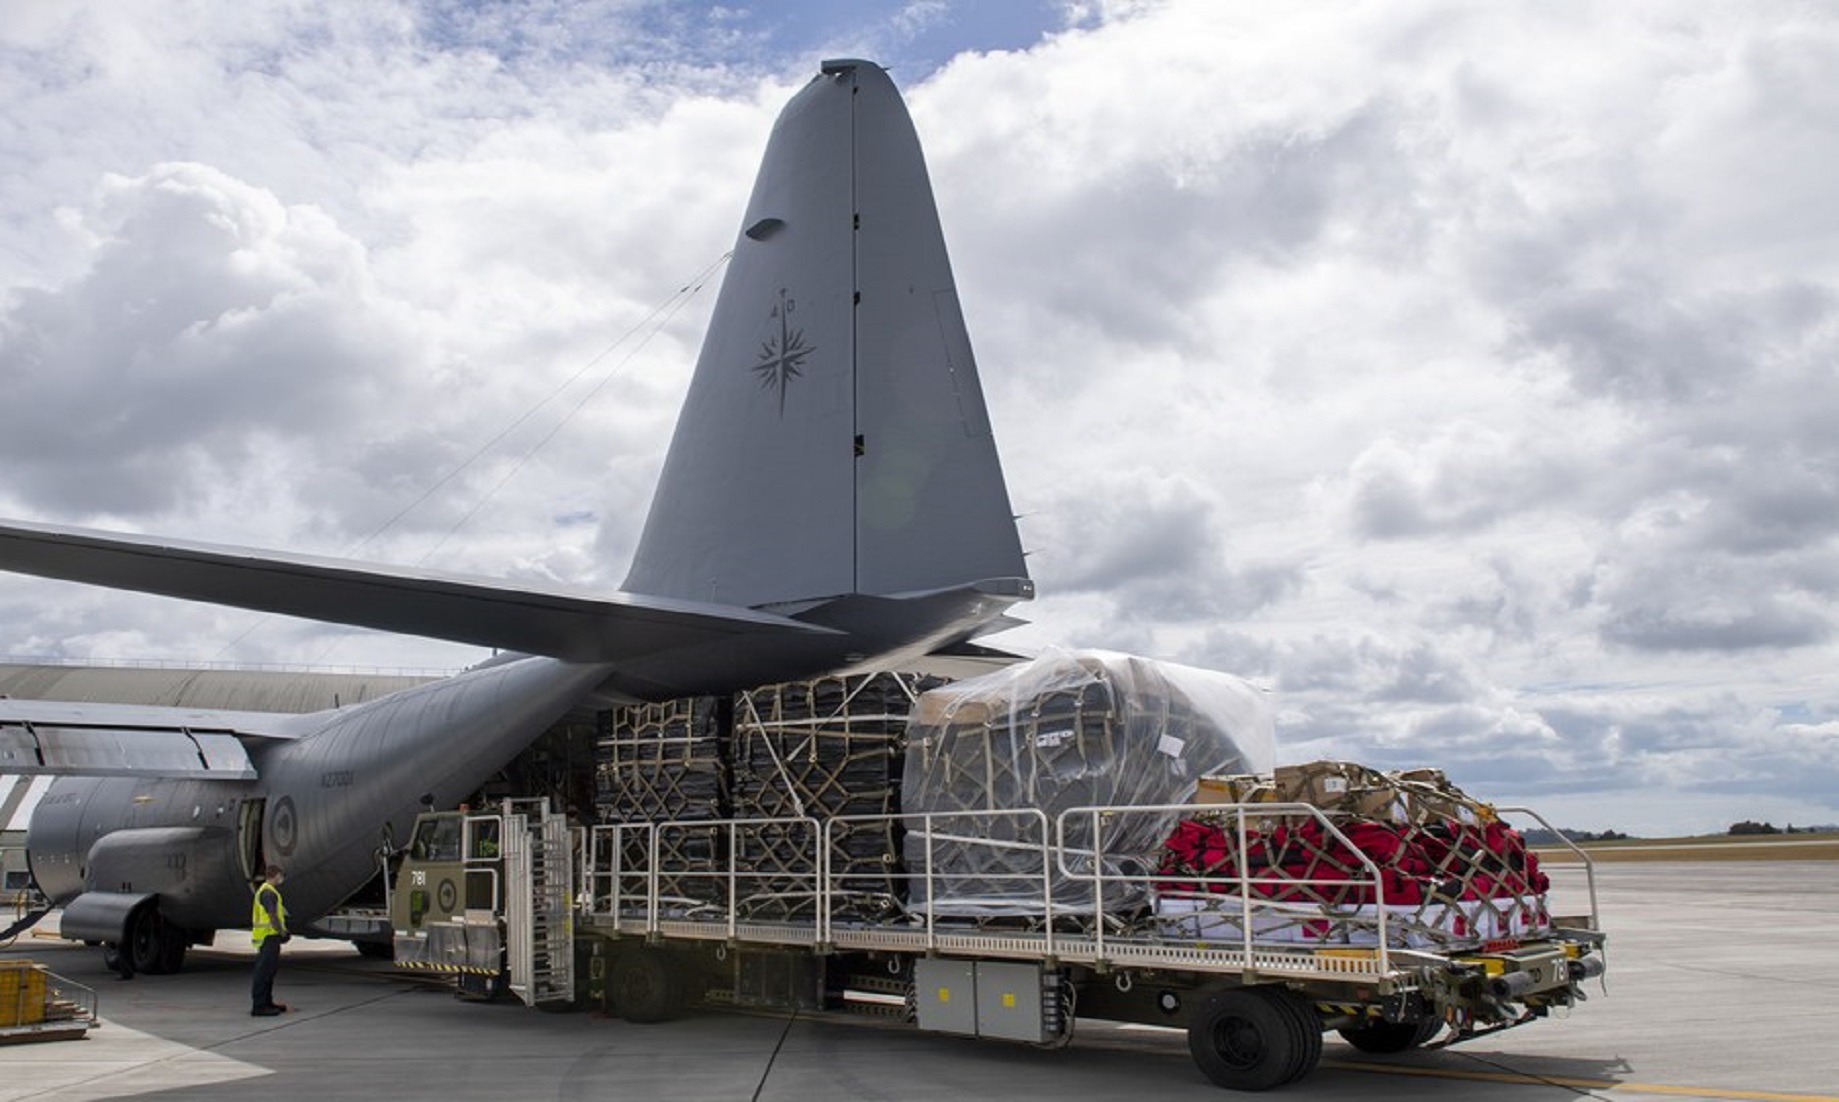 First Relief Flights Arrive In Tonga After Volcano Eruption: UN